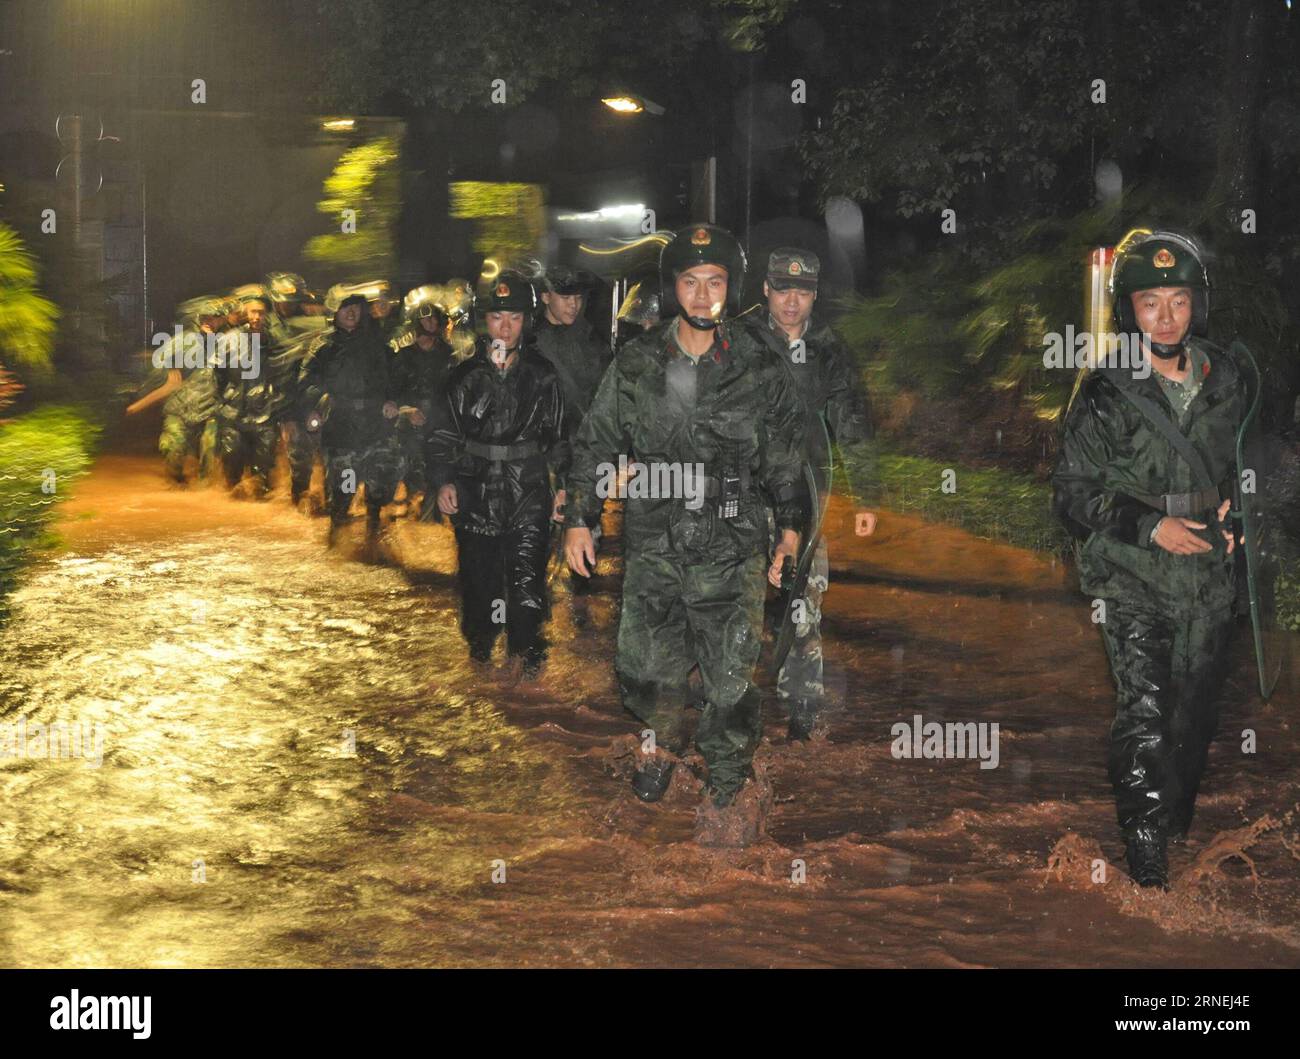 CHONGQING, June 23, 2016 -- Armed policemen gather to reinforce security of Yuxi Prison in Yongchuan of Chongqing, southwest China, June 23, 2016. Heavy rain on Thursday night flooded a section of the outer wall of Yuxi Prison forcing the relocation of 1,400 inmates over night. The prison authority has reinforced security and ensured provisions. )(mcg/yxb) CHINA-CHONGQING-HEAVY RAIN-PRISONER-RELOCATION (CN) ChenxCheng PUBLICATIONxNOTxINxCHN   Chongqing June 23 2016 Armed Policemen gather to reinforce Security of Yuxi Prison in Chuan Yong of Chongqing Southwest China June 23 2016 Heavy Rain ON Stock Photo